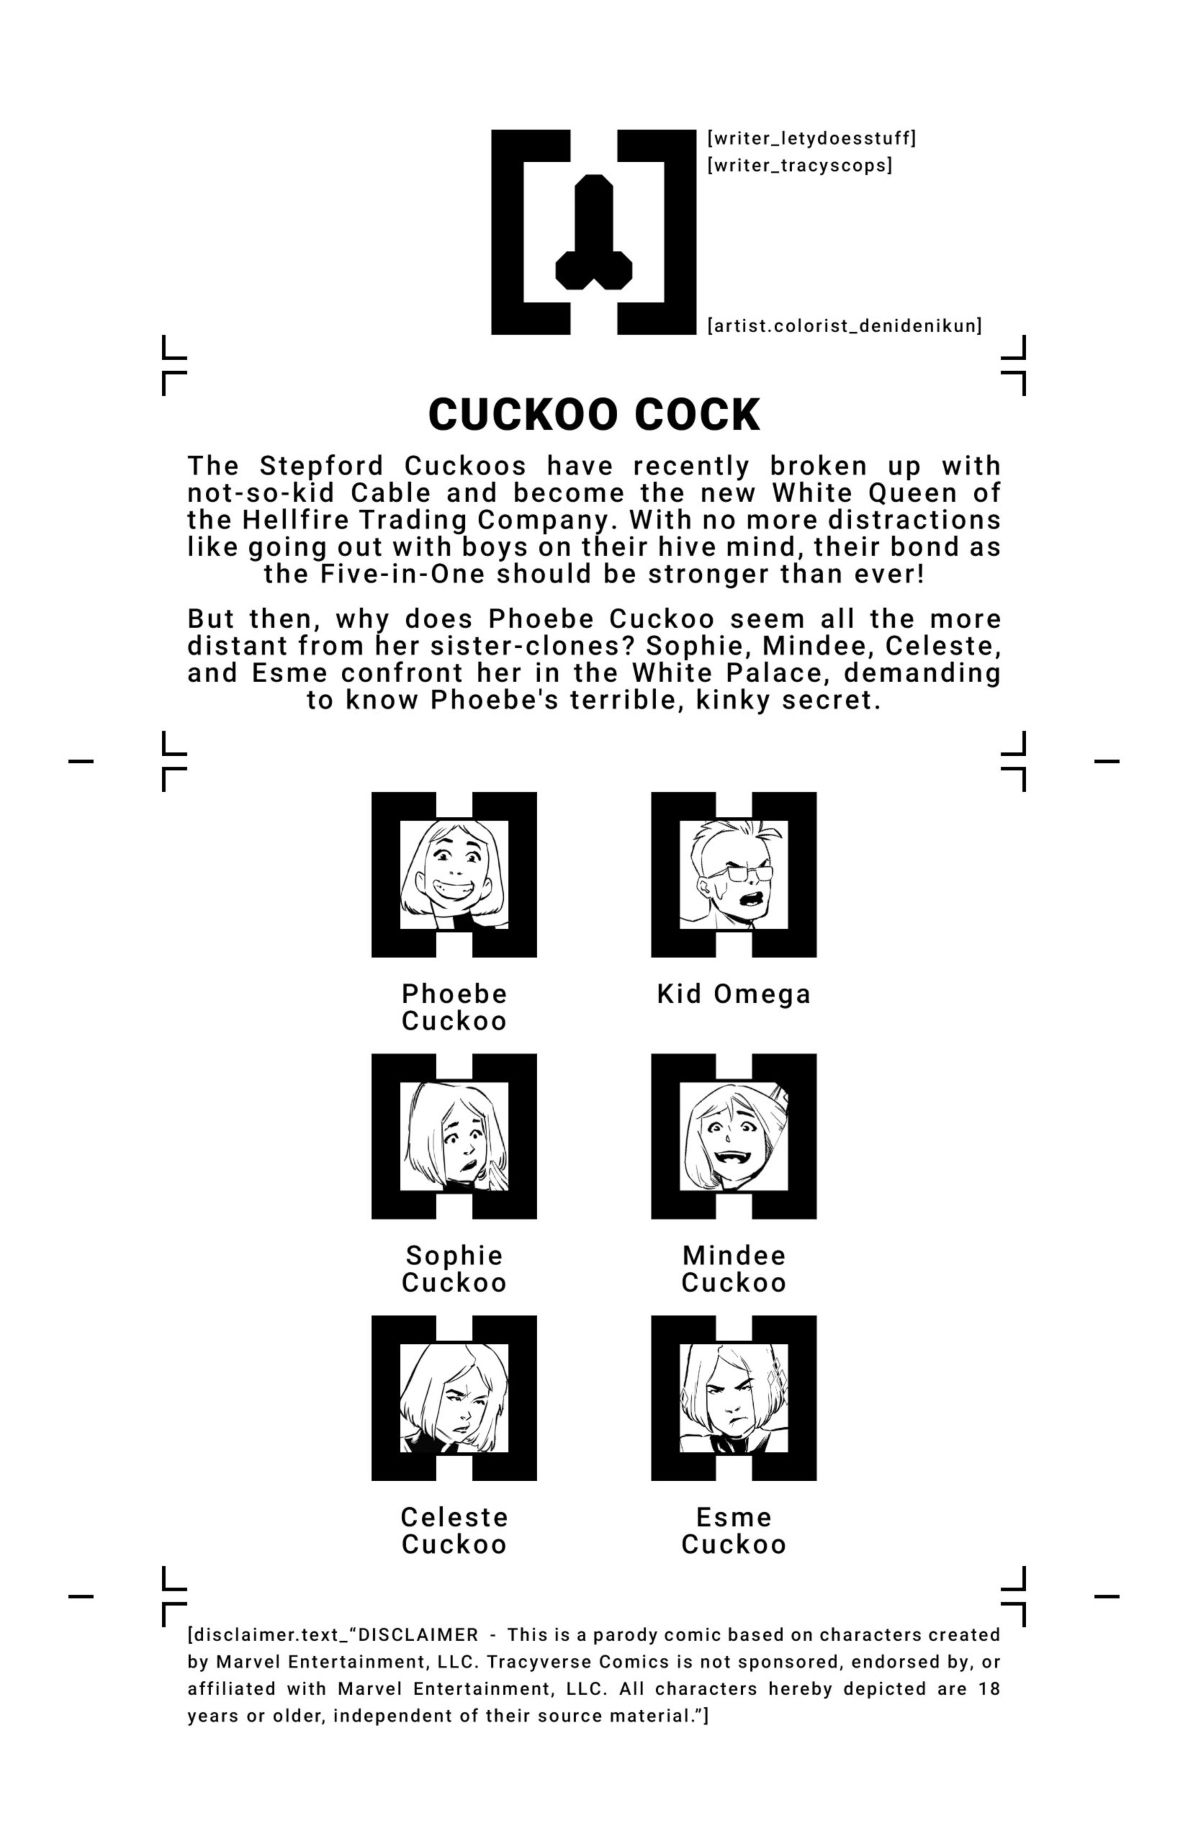 House of XXX: Cuckoo Cock by Tracy Scops